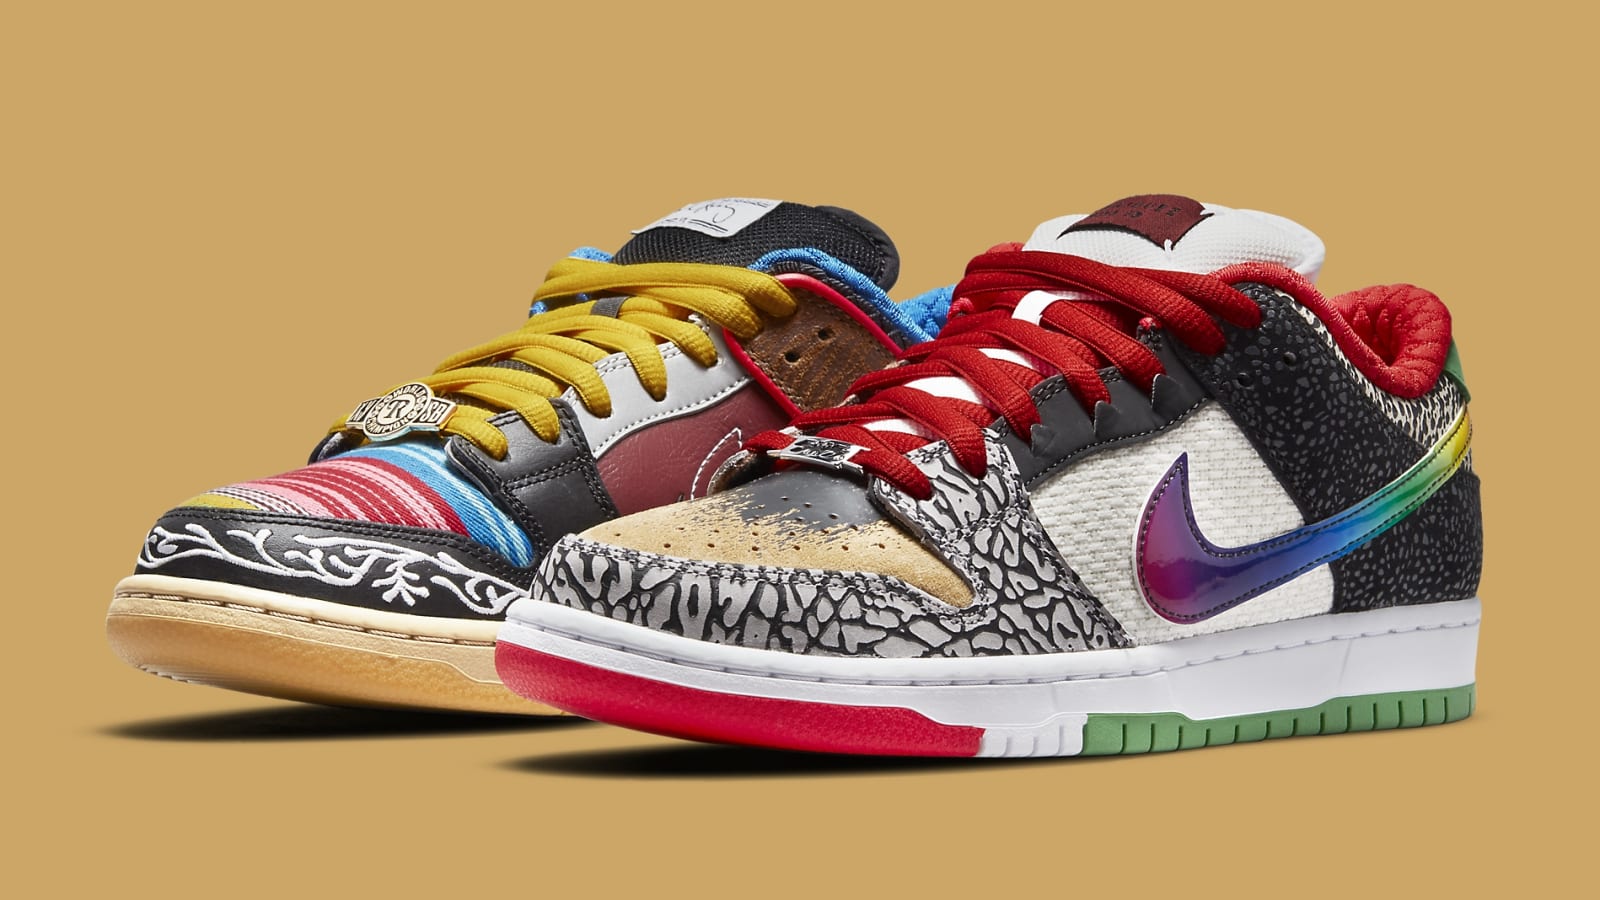 What The Paul Nike SB - the iconic silhouette has received a long-awaited update